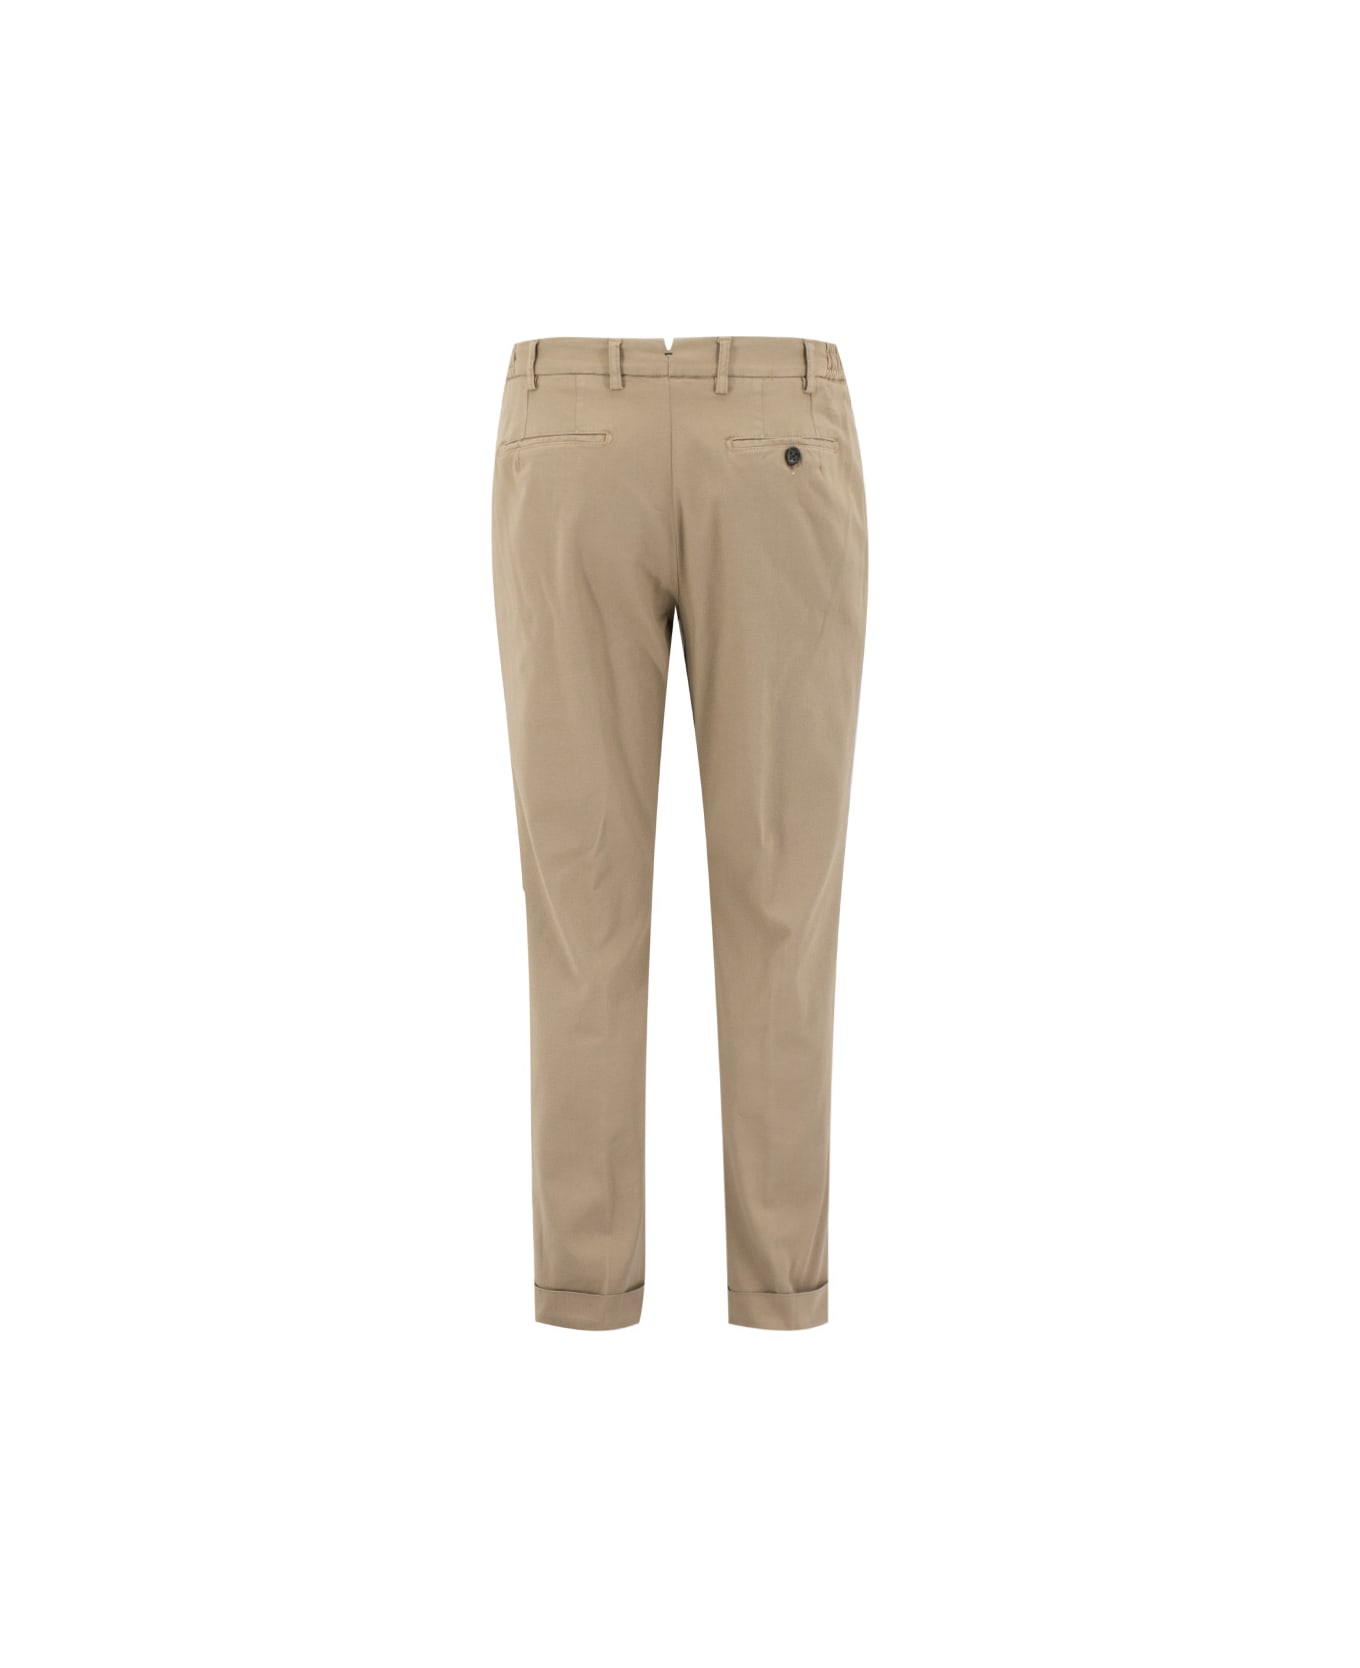 Berwich Trousers - SAND ボトムス